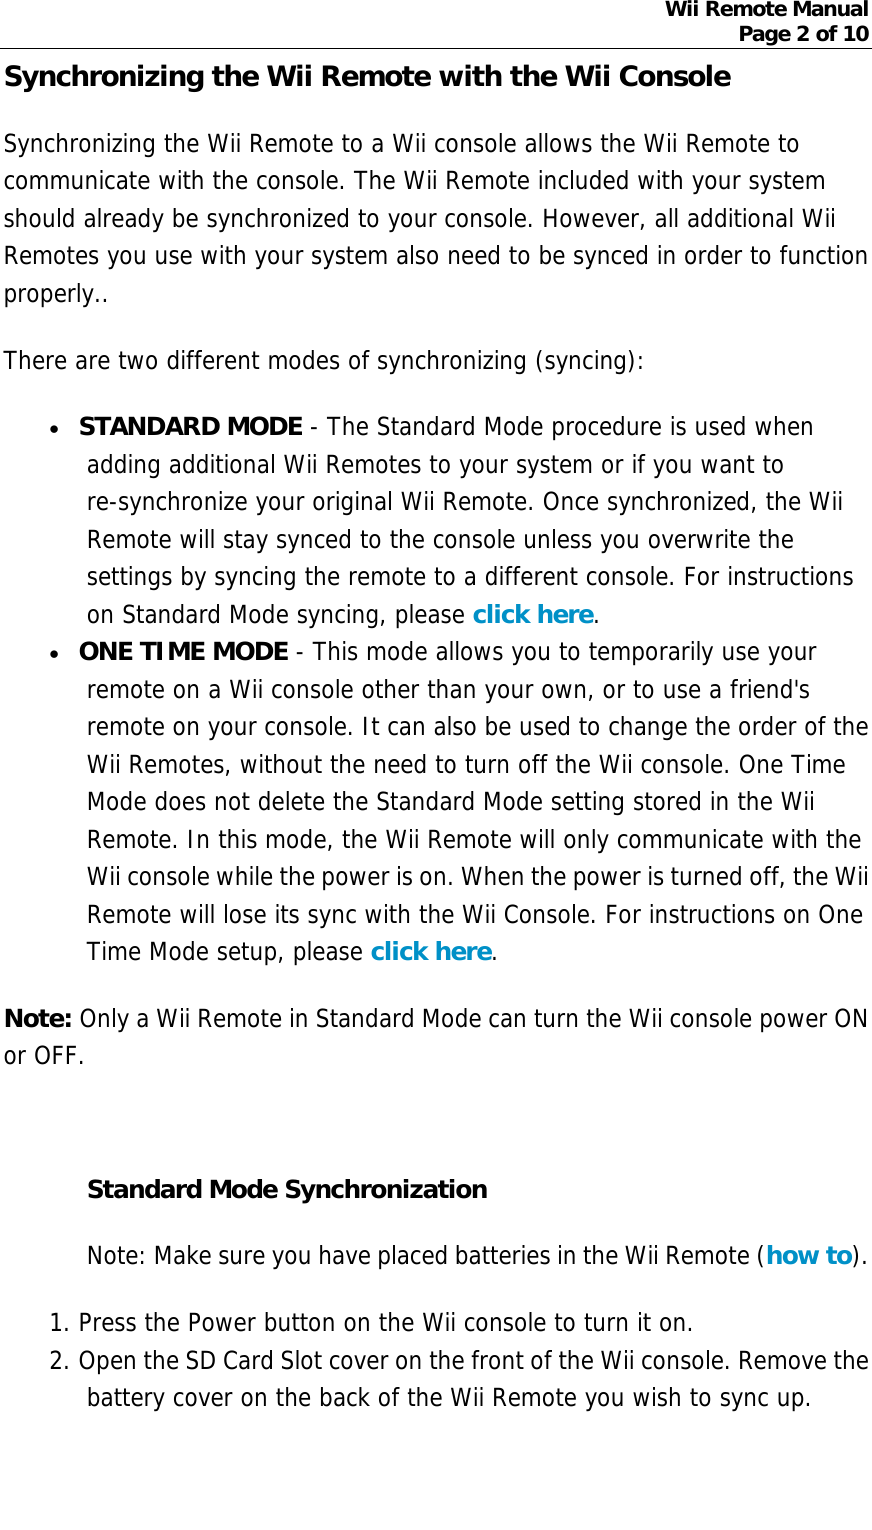 Wii Remote Manual Page 2 of 10  Synchronizing the Wii Remote with the Wii Console   Synchronizing the Wii Remote to a Wii console allows the Wii Remote to communicate with the console. The Wii Remote included with your system should already be synchronized to your console. However, all additional Wii Remotes you use with your system also need to be synced in order to function properly.. There are two different modes of synchronizing (syncing): • STANDARD MODE - The Standard Mode procedure is used when adding additional Wii Remotes to your system or if you want to re-synchronize your original Wii Remote. Once synchronized, the Wii Remote will stay synced to the console unless you overwrite the settings by syncing the remote to a different console. For instructions on Standard Mode syncing, please click here.  • ONE TIME MODE - This mode allows you to temporarily use your remote on a Wii console other than your own, or to use a friend&apos;s remote on your console. It can also be used to change the order of the Wii Remotes, without the need to turn off the Wii console. One Time Mode does not delete the Standard Mode setting stored in the Wii Remote. In this mode, the Wii Remote will only communicate with the Wii console while the power is on. When the power is turned off, the Wii Remote will lose its sync with the Wii Console. For instructions on One Time Mode setup, please click here.  Note: Only a Wii Remote in Standard Mode can turn the Wii console power ON or OFF.    Standard Mode Synchronization Note: Make sure you have placed batteries in the Wii Remote (how to). 1. Press the Power button on the Wii console to turn it on.  2. Open the SD Card Slot cover on the front of the Wii console. Remove the battery cover on the back of the Wii Remote you wish to sync up.  